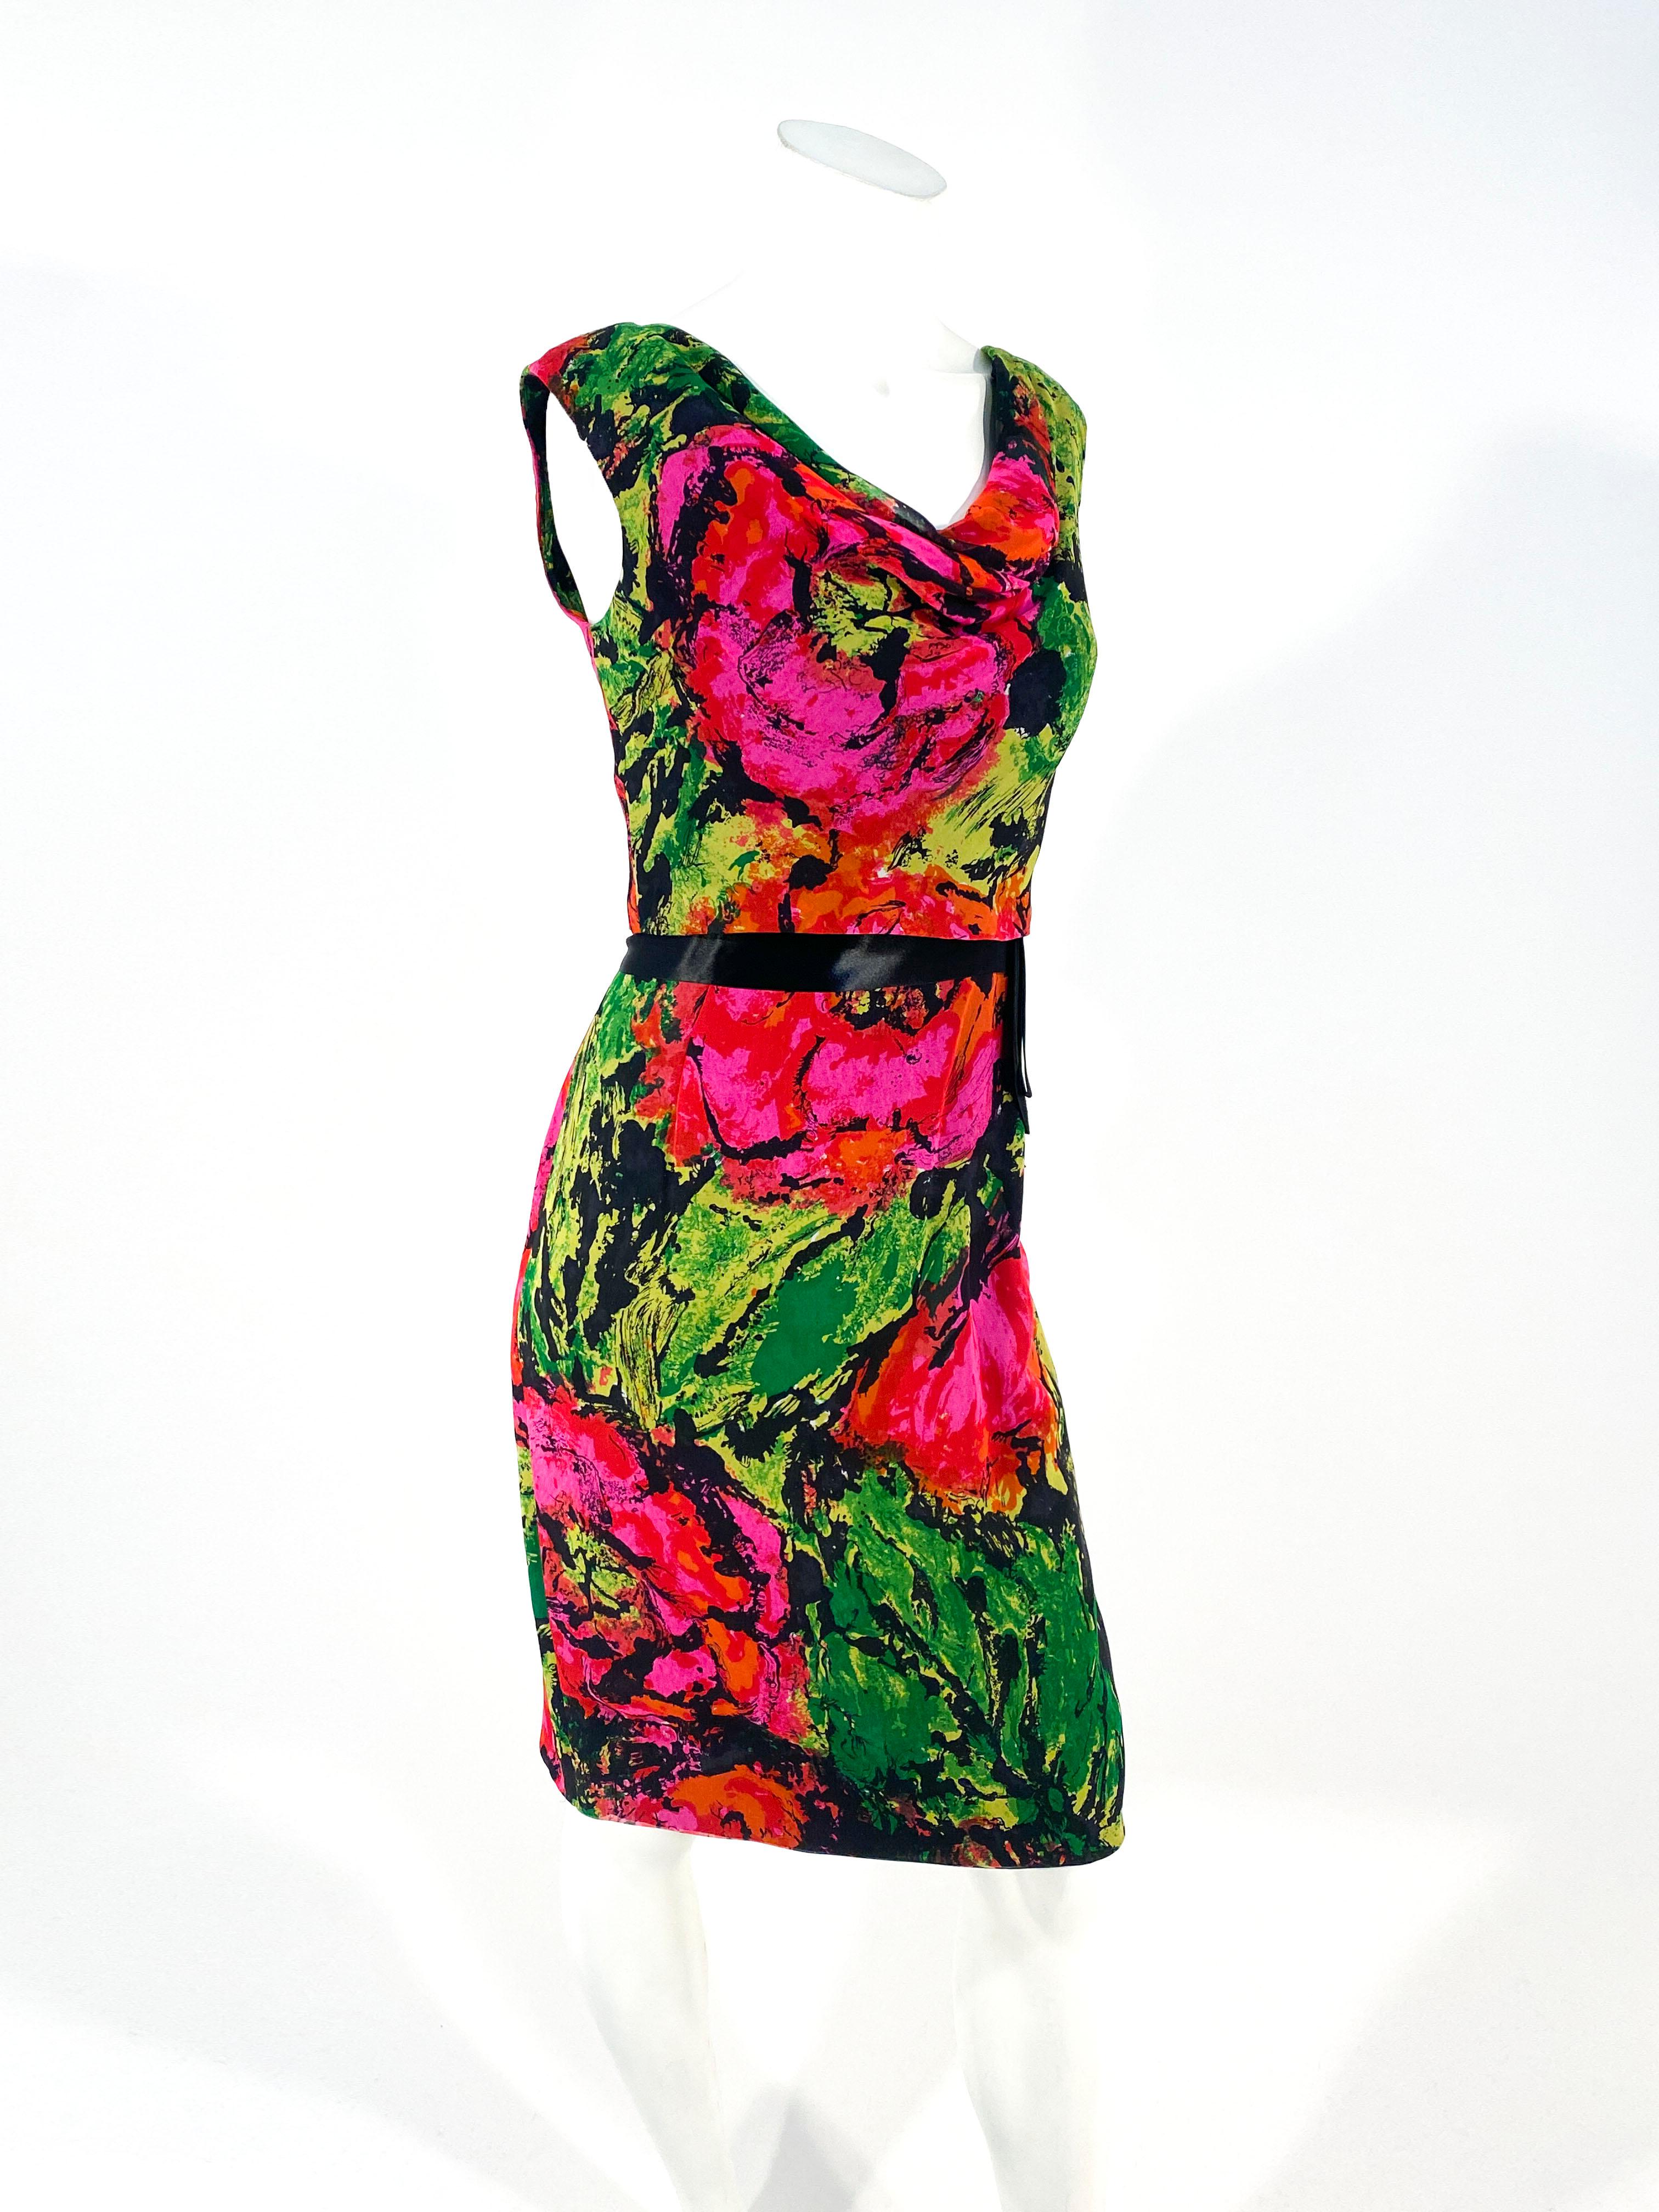 1960s Impressionistic floral printed dress with matching shell top made of silk chiffon. The shell top has a boat neckline that is layered over the dress that has a satin black satin waist sash. The print features red, magenta, green, black, and